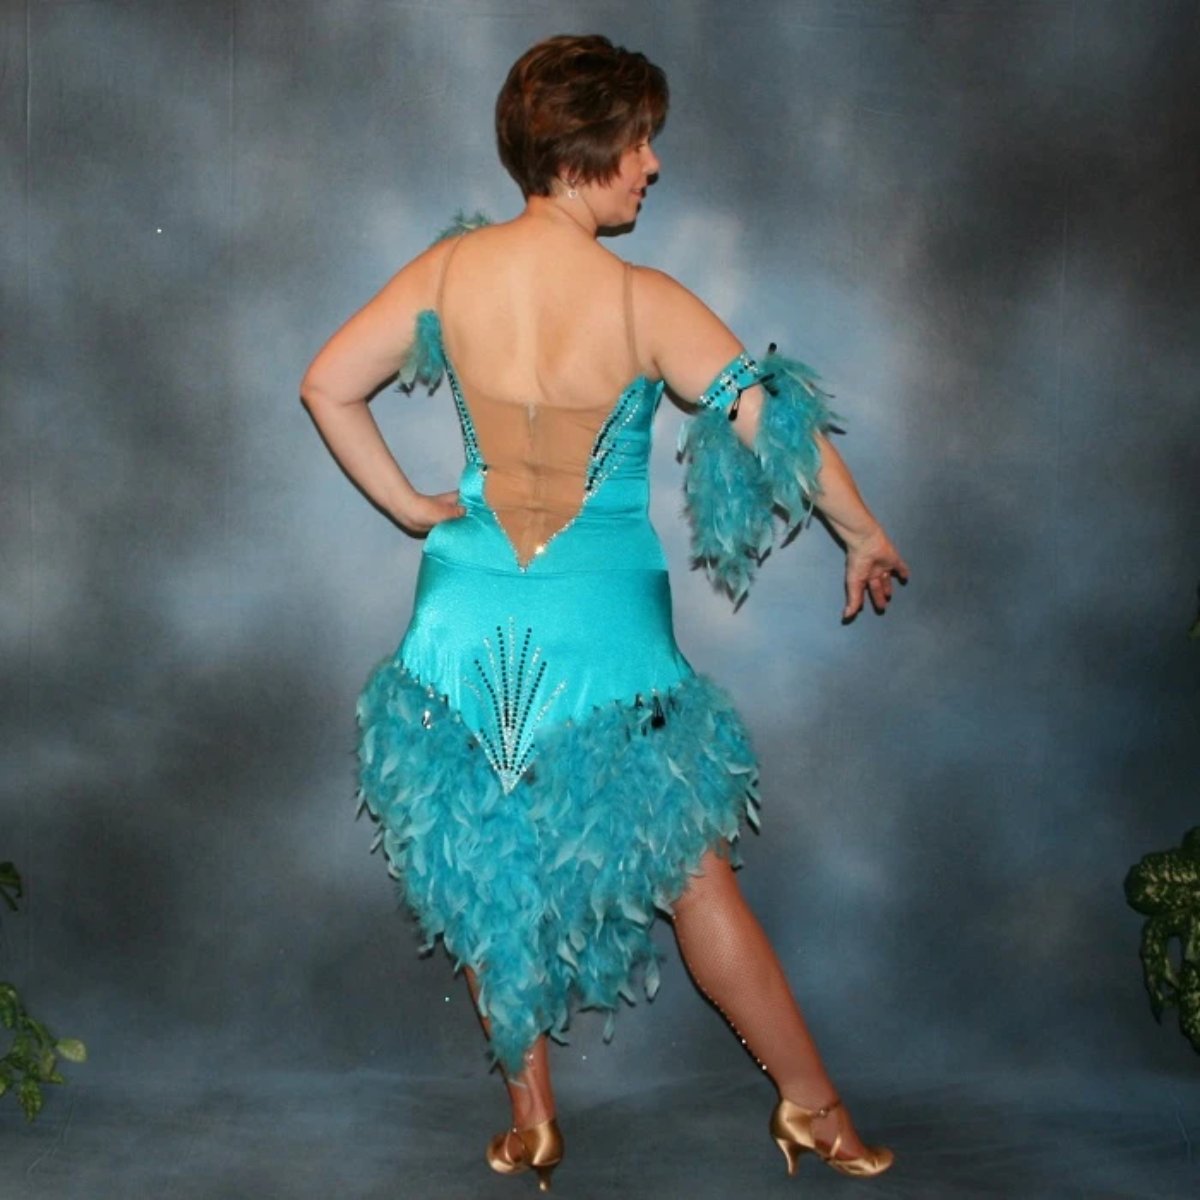 back view of Turquoise Latin/rhythm dance dress created in turquoise lycra on nude illusion, is embellished with crystal and jet black Swarovski rhinestones, with chandelle feathers and black spangles. The v styled skirt slits up high on both sides. Matching arm bands complete the look.